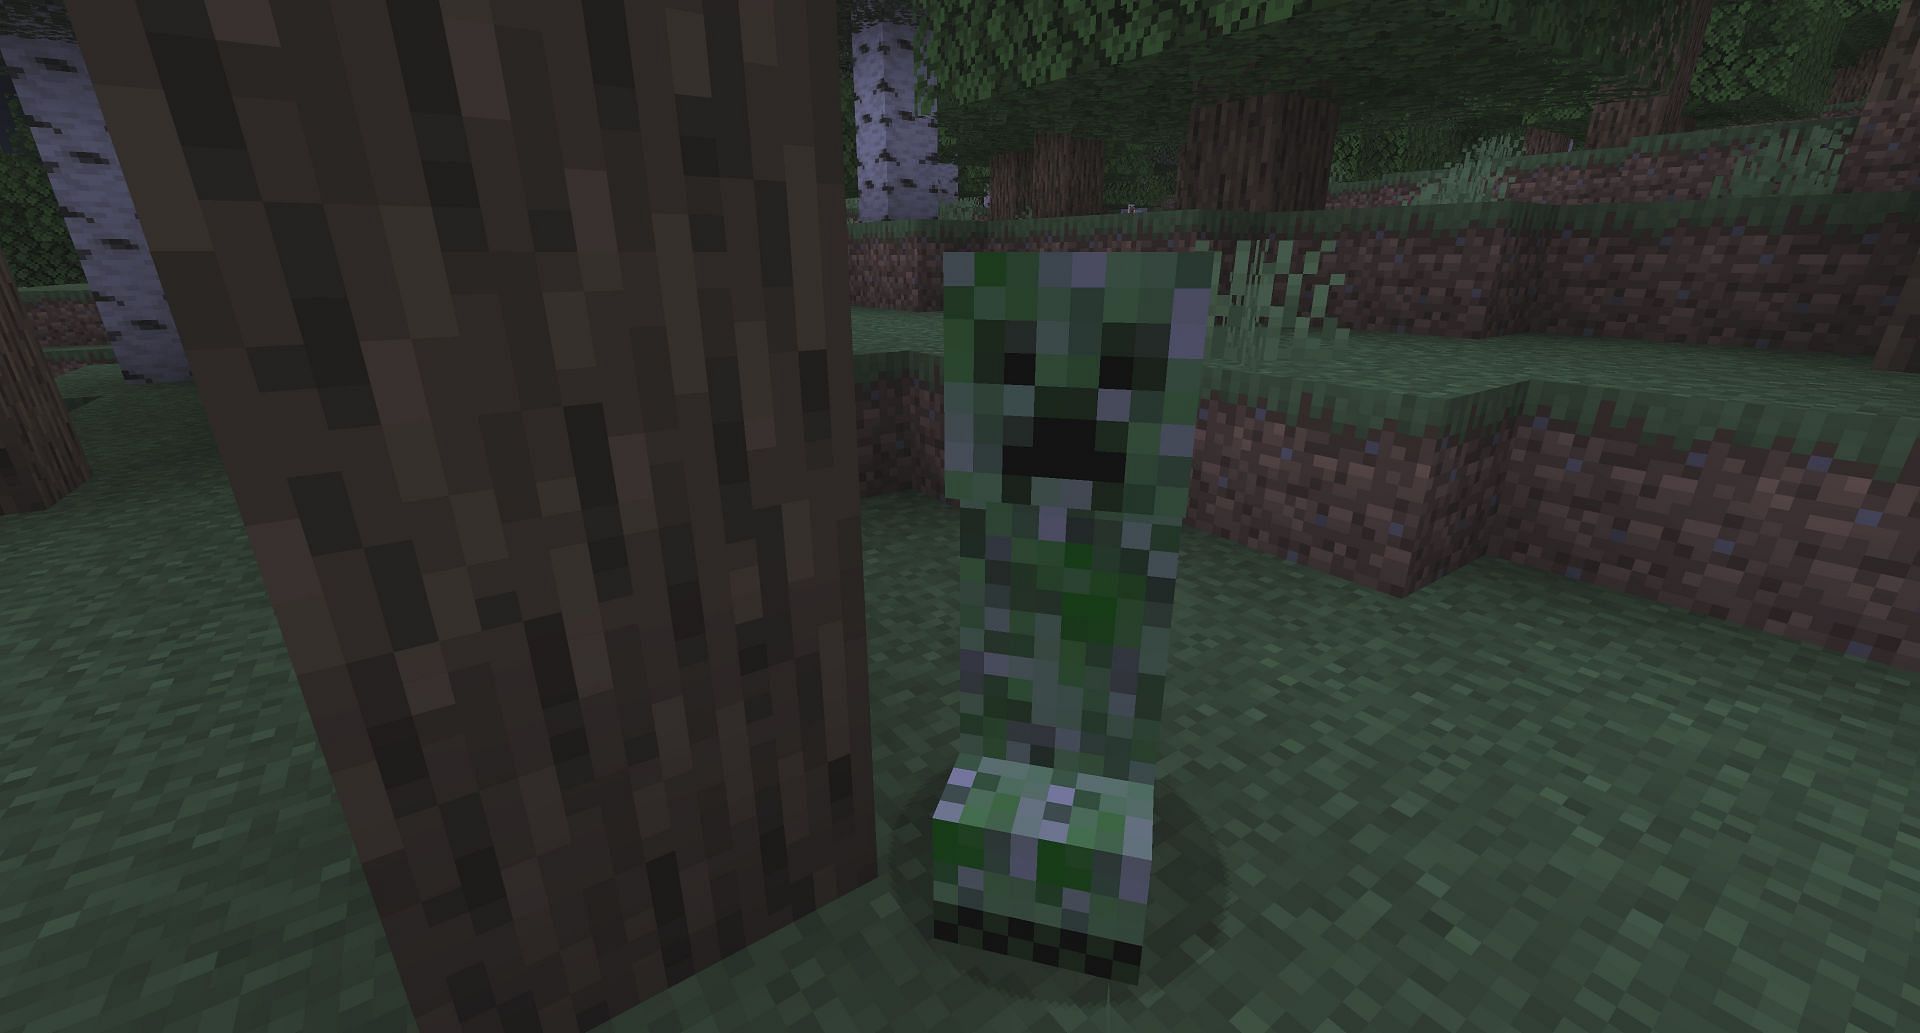 A creeper, both the game